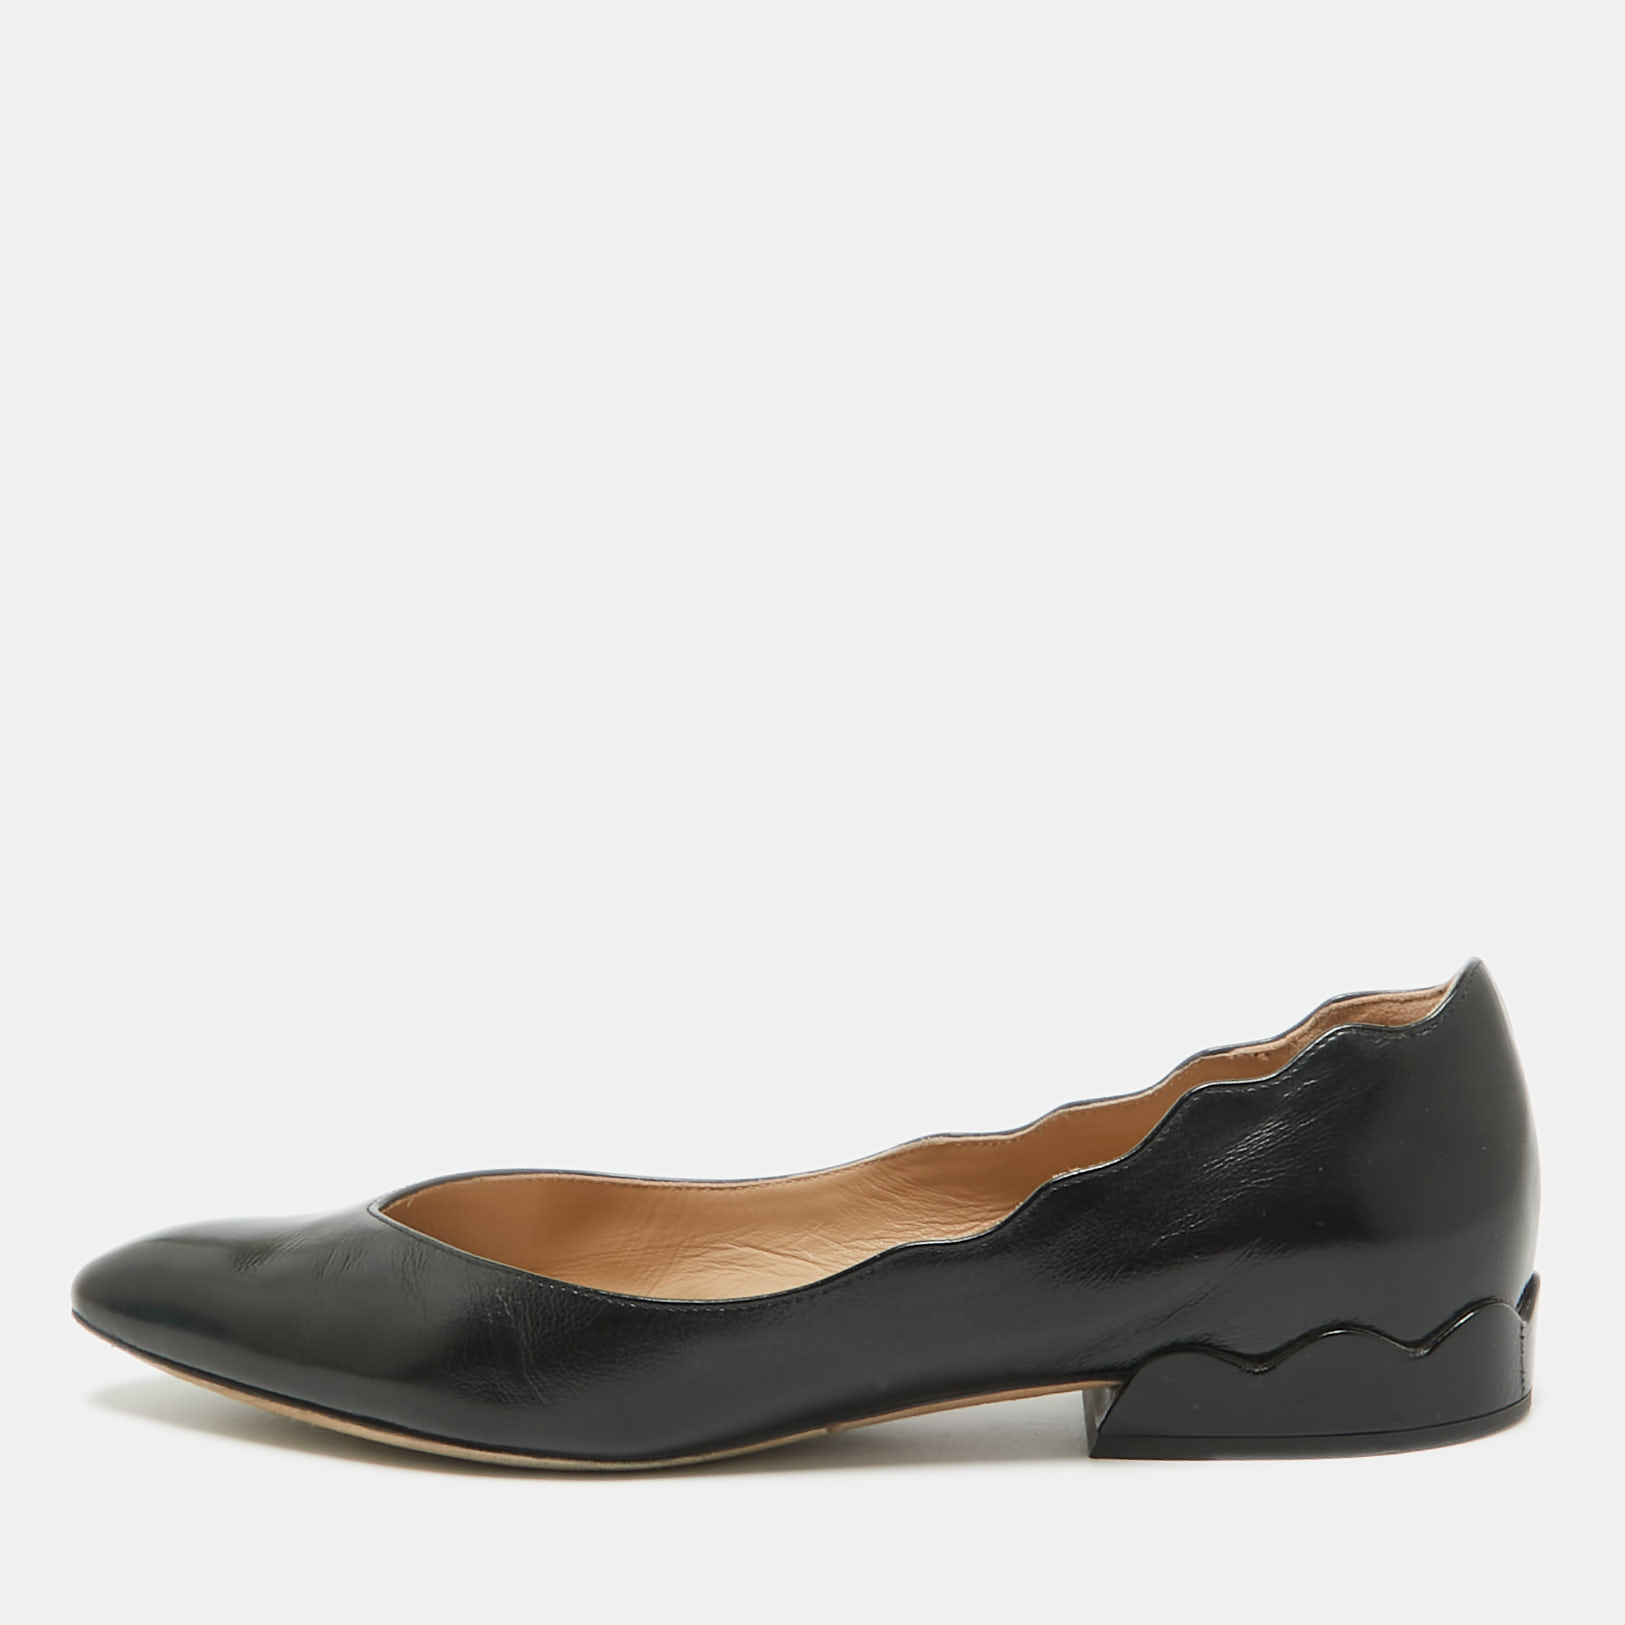 Pre-owned Chloé Black Leather Pointed Toe Ballet Flats Size 37